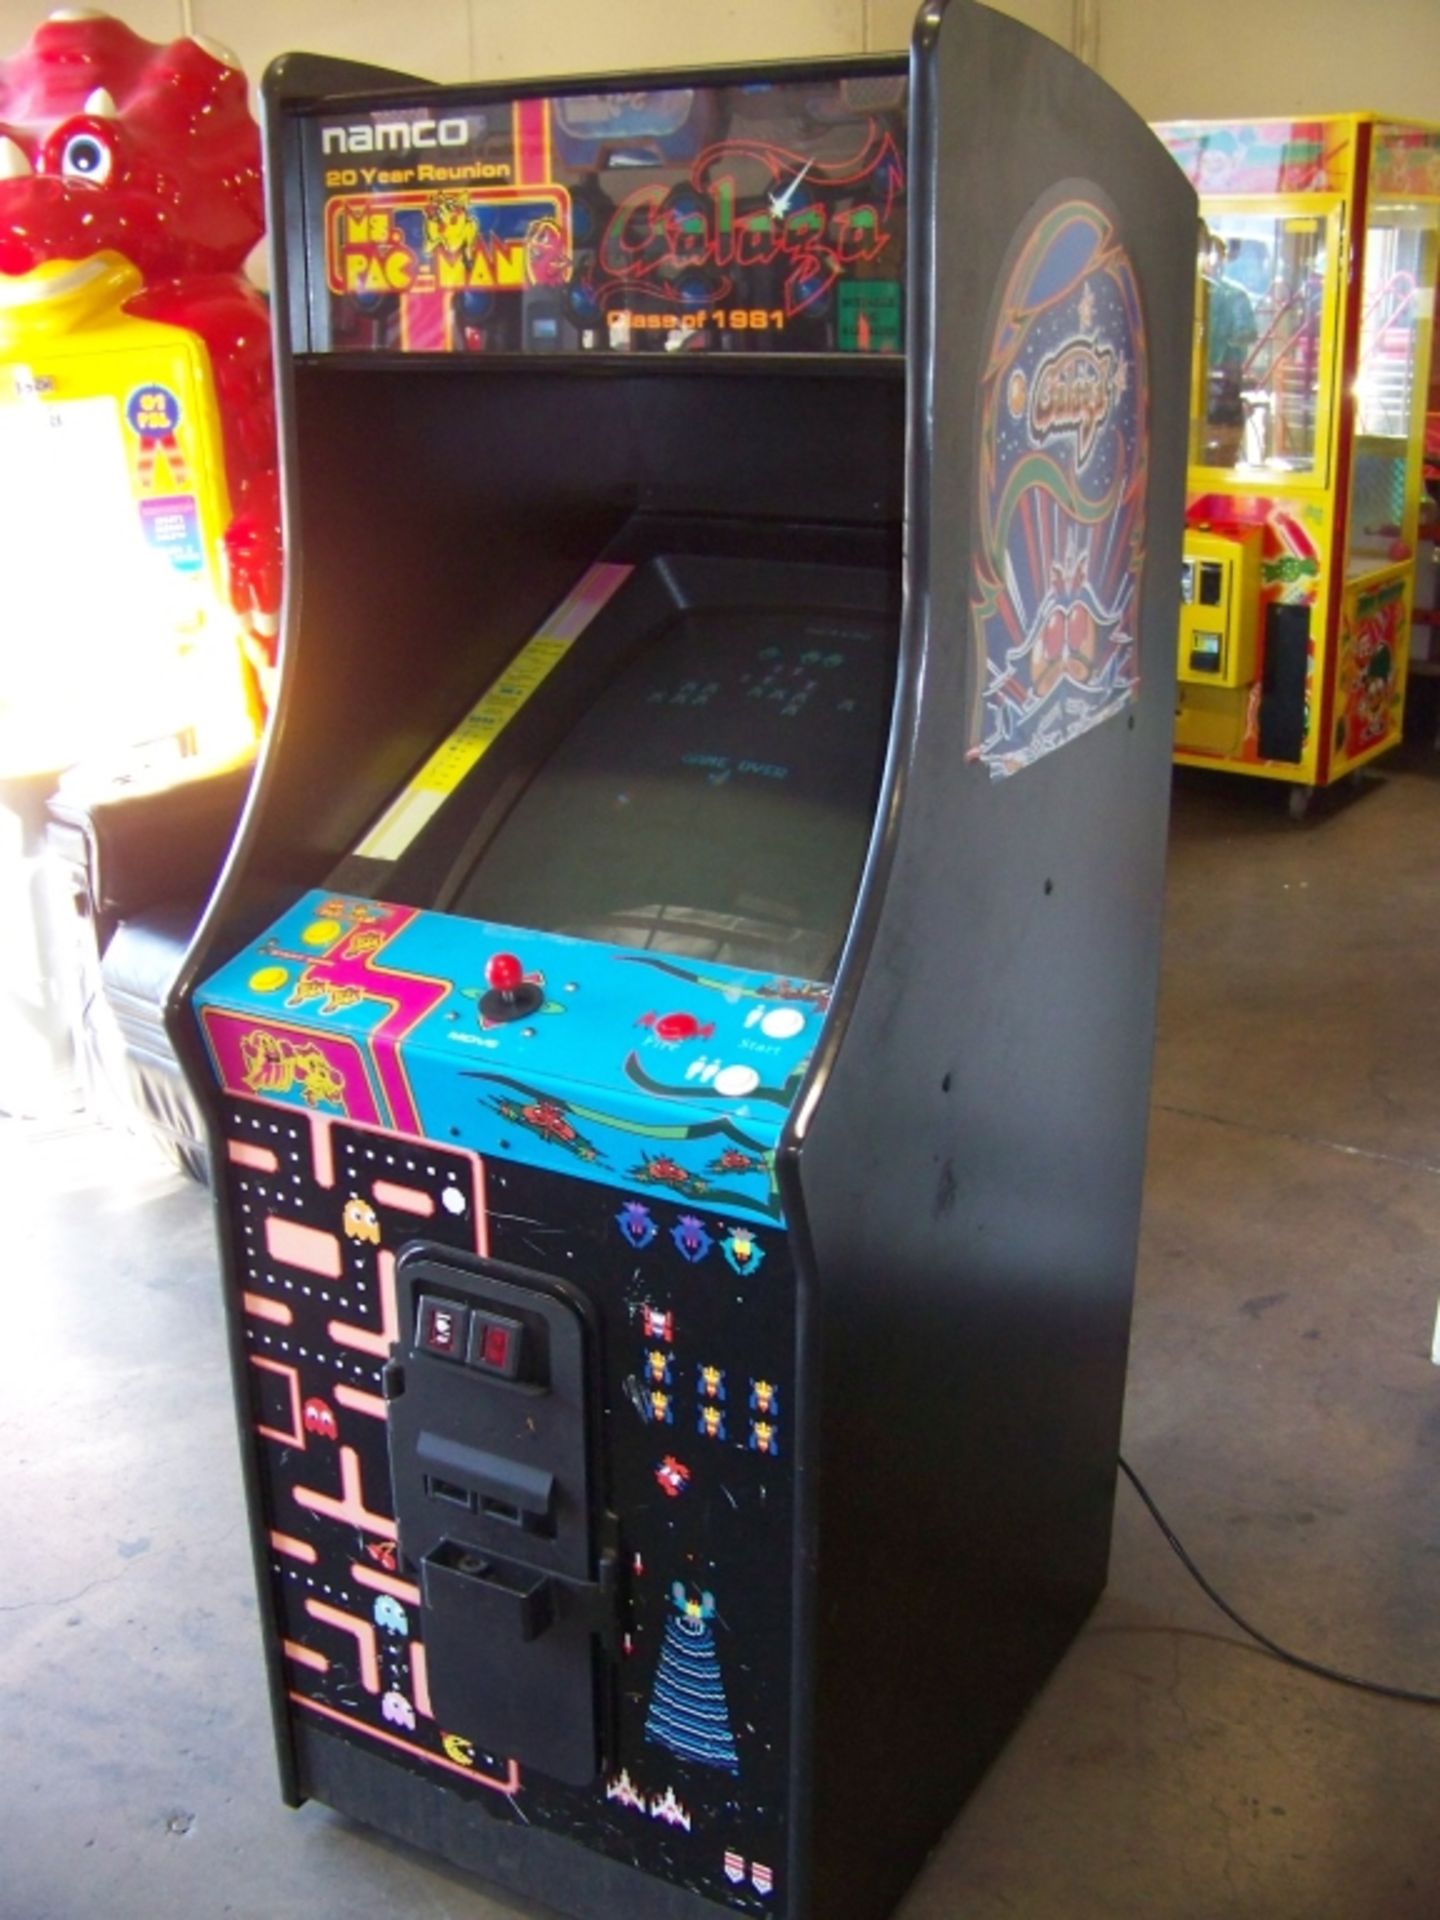 CLASS OF 1981 NAMCO MS. PACMAN GALAGA COMBO - Image 7 of 9